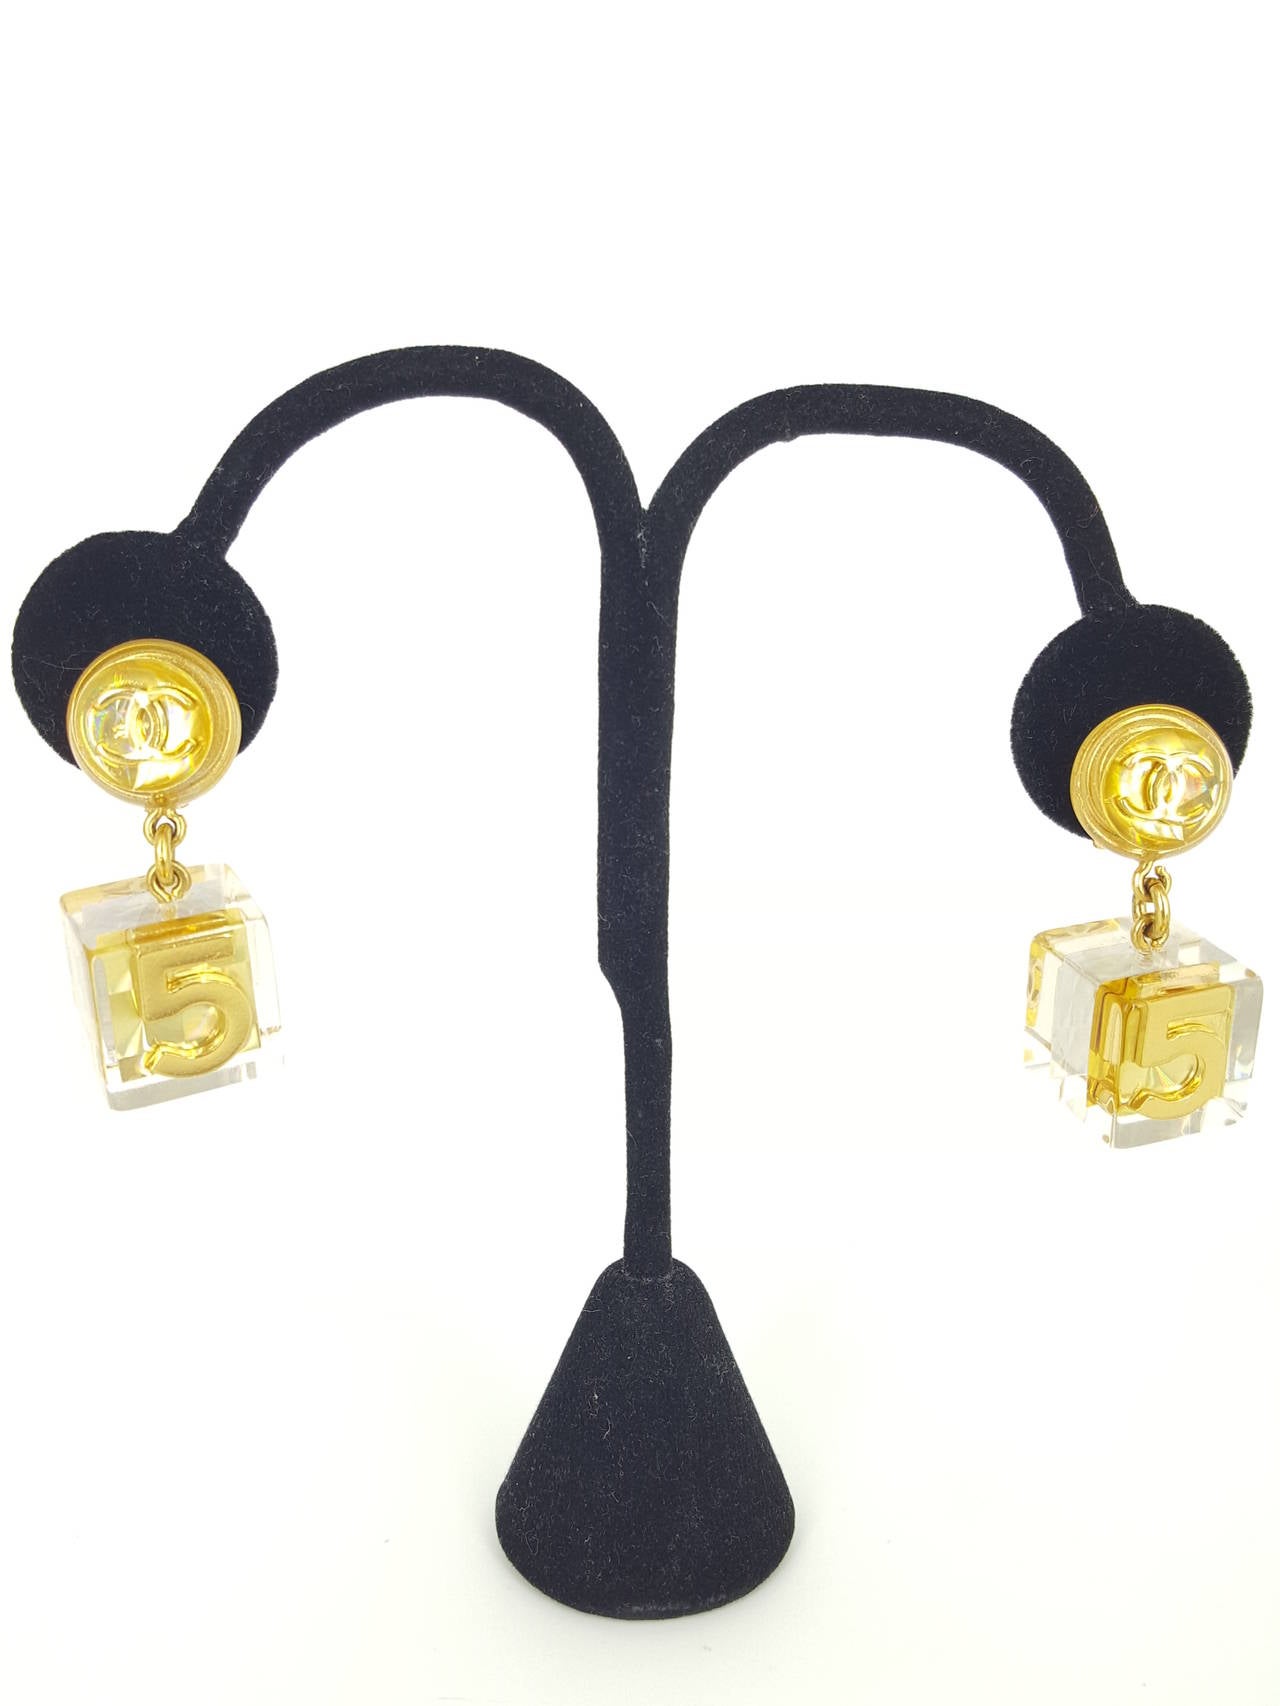 Offered for sale is a fabulous  pair of Chanel Vintage earrings in Lucite and gold with a large 